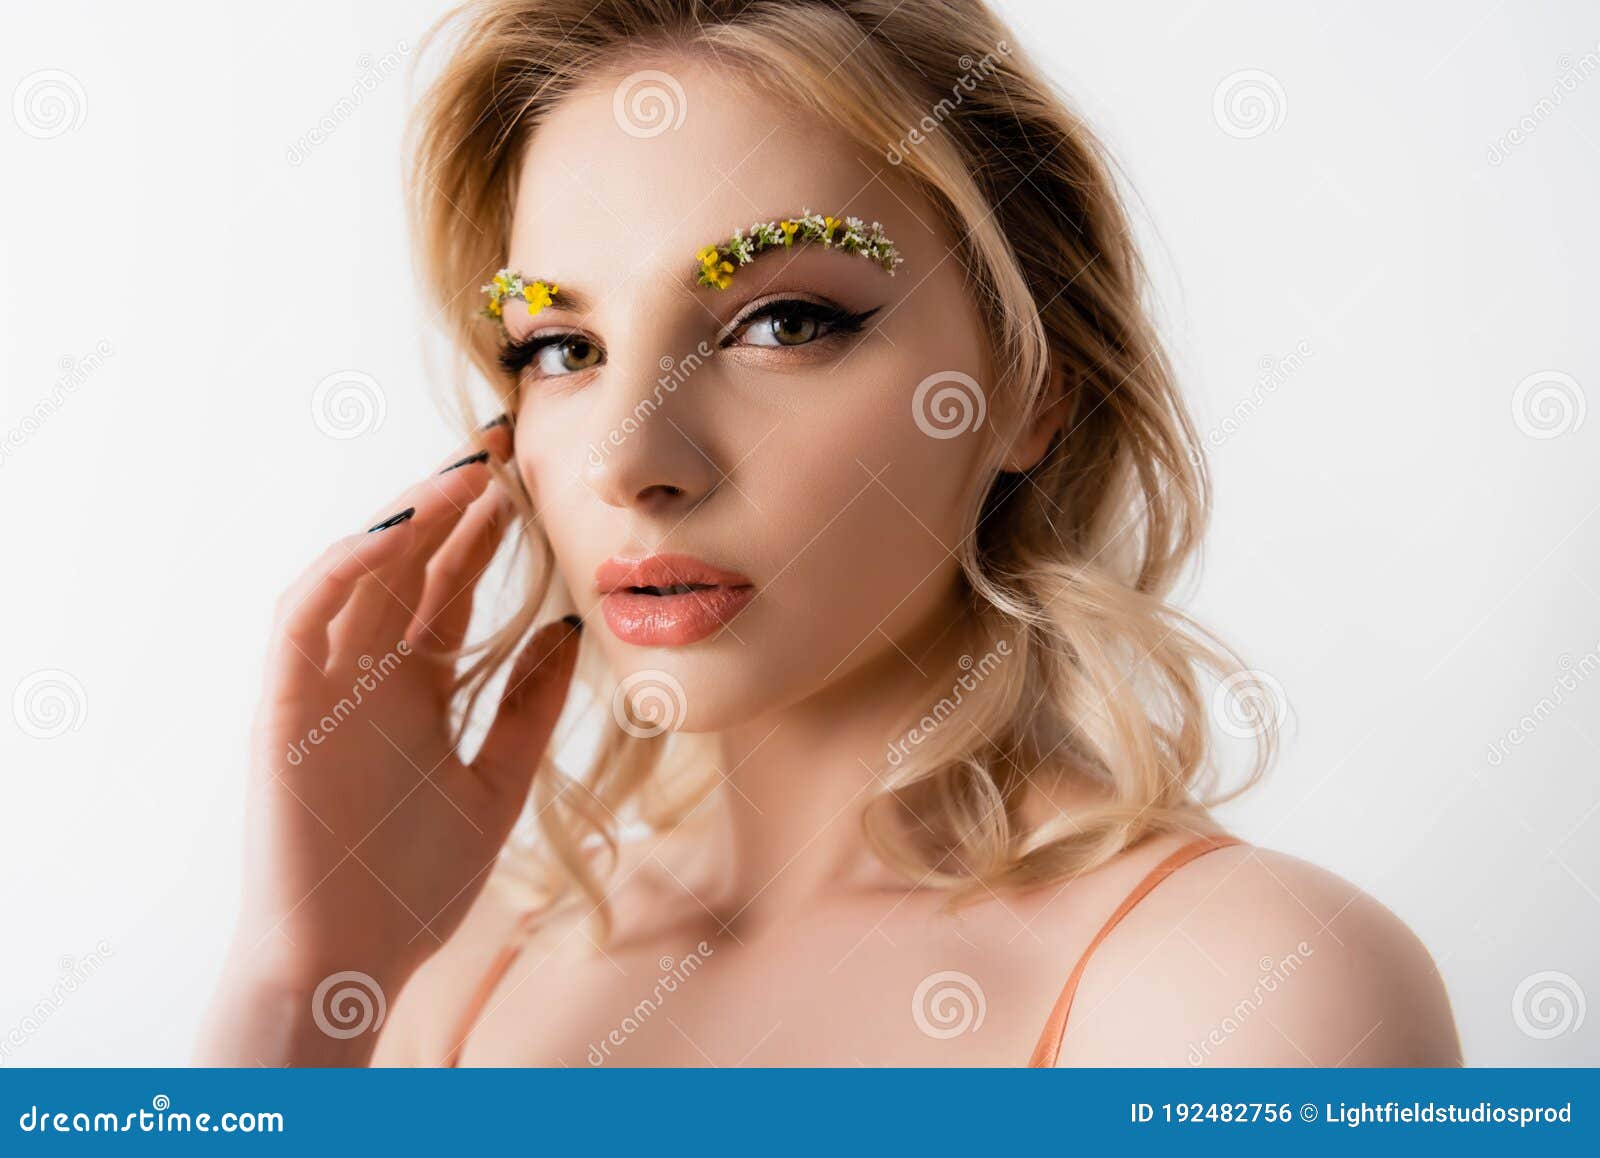 Blonde woman with wildflowers in her hair - wide 4